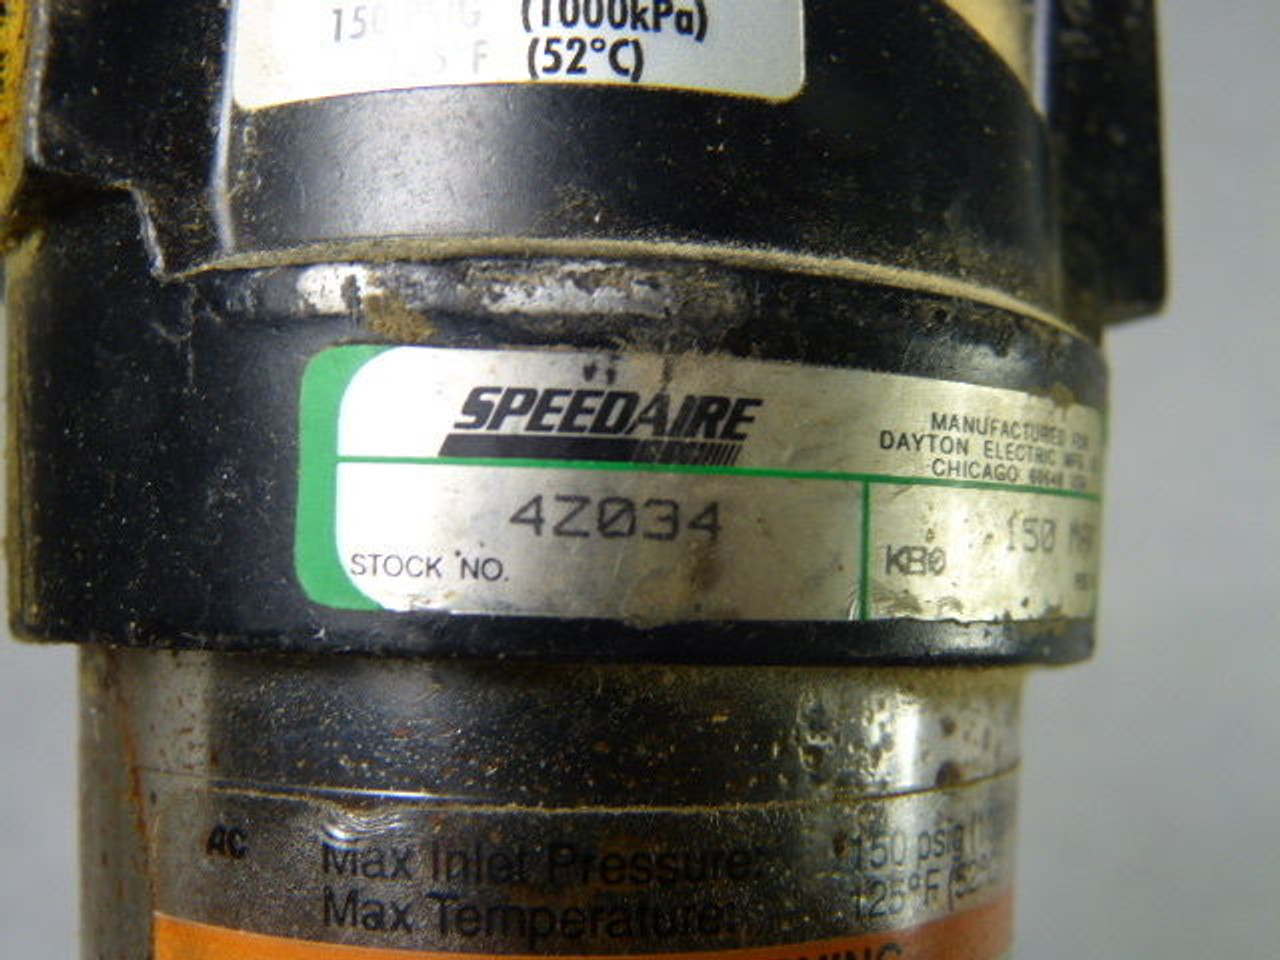 Speedaire 4Z034 Air Line Filter 150 PSIG USED